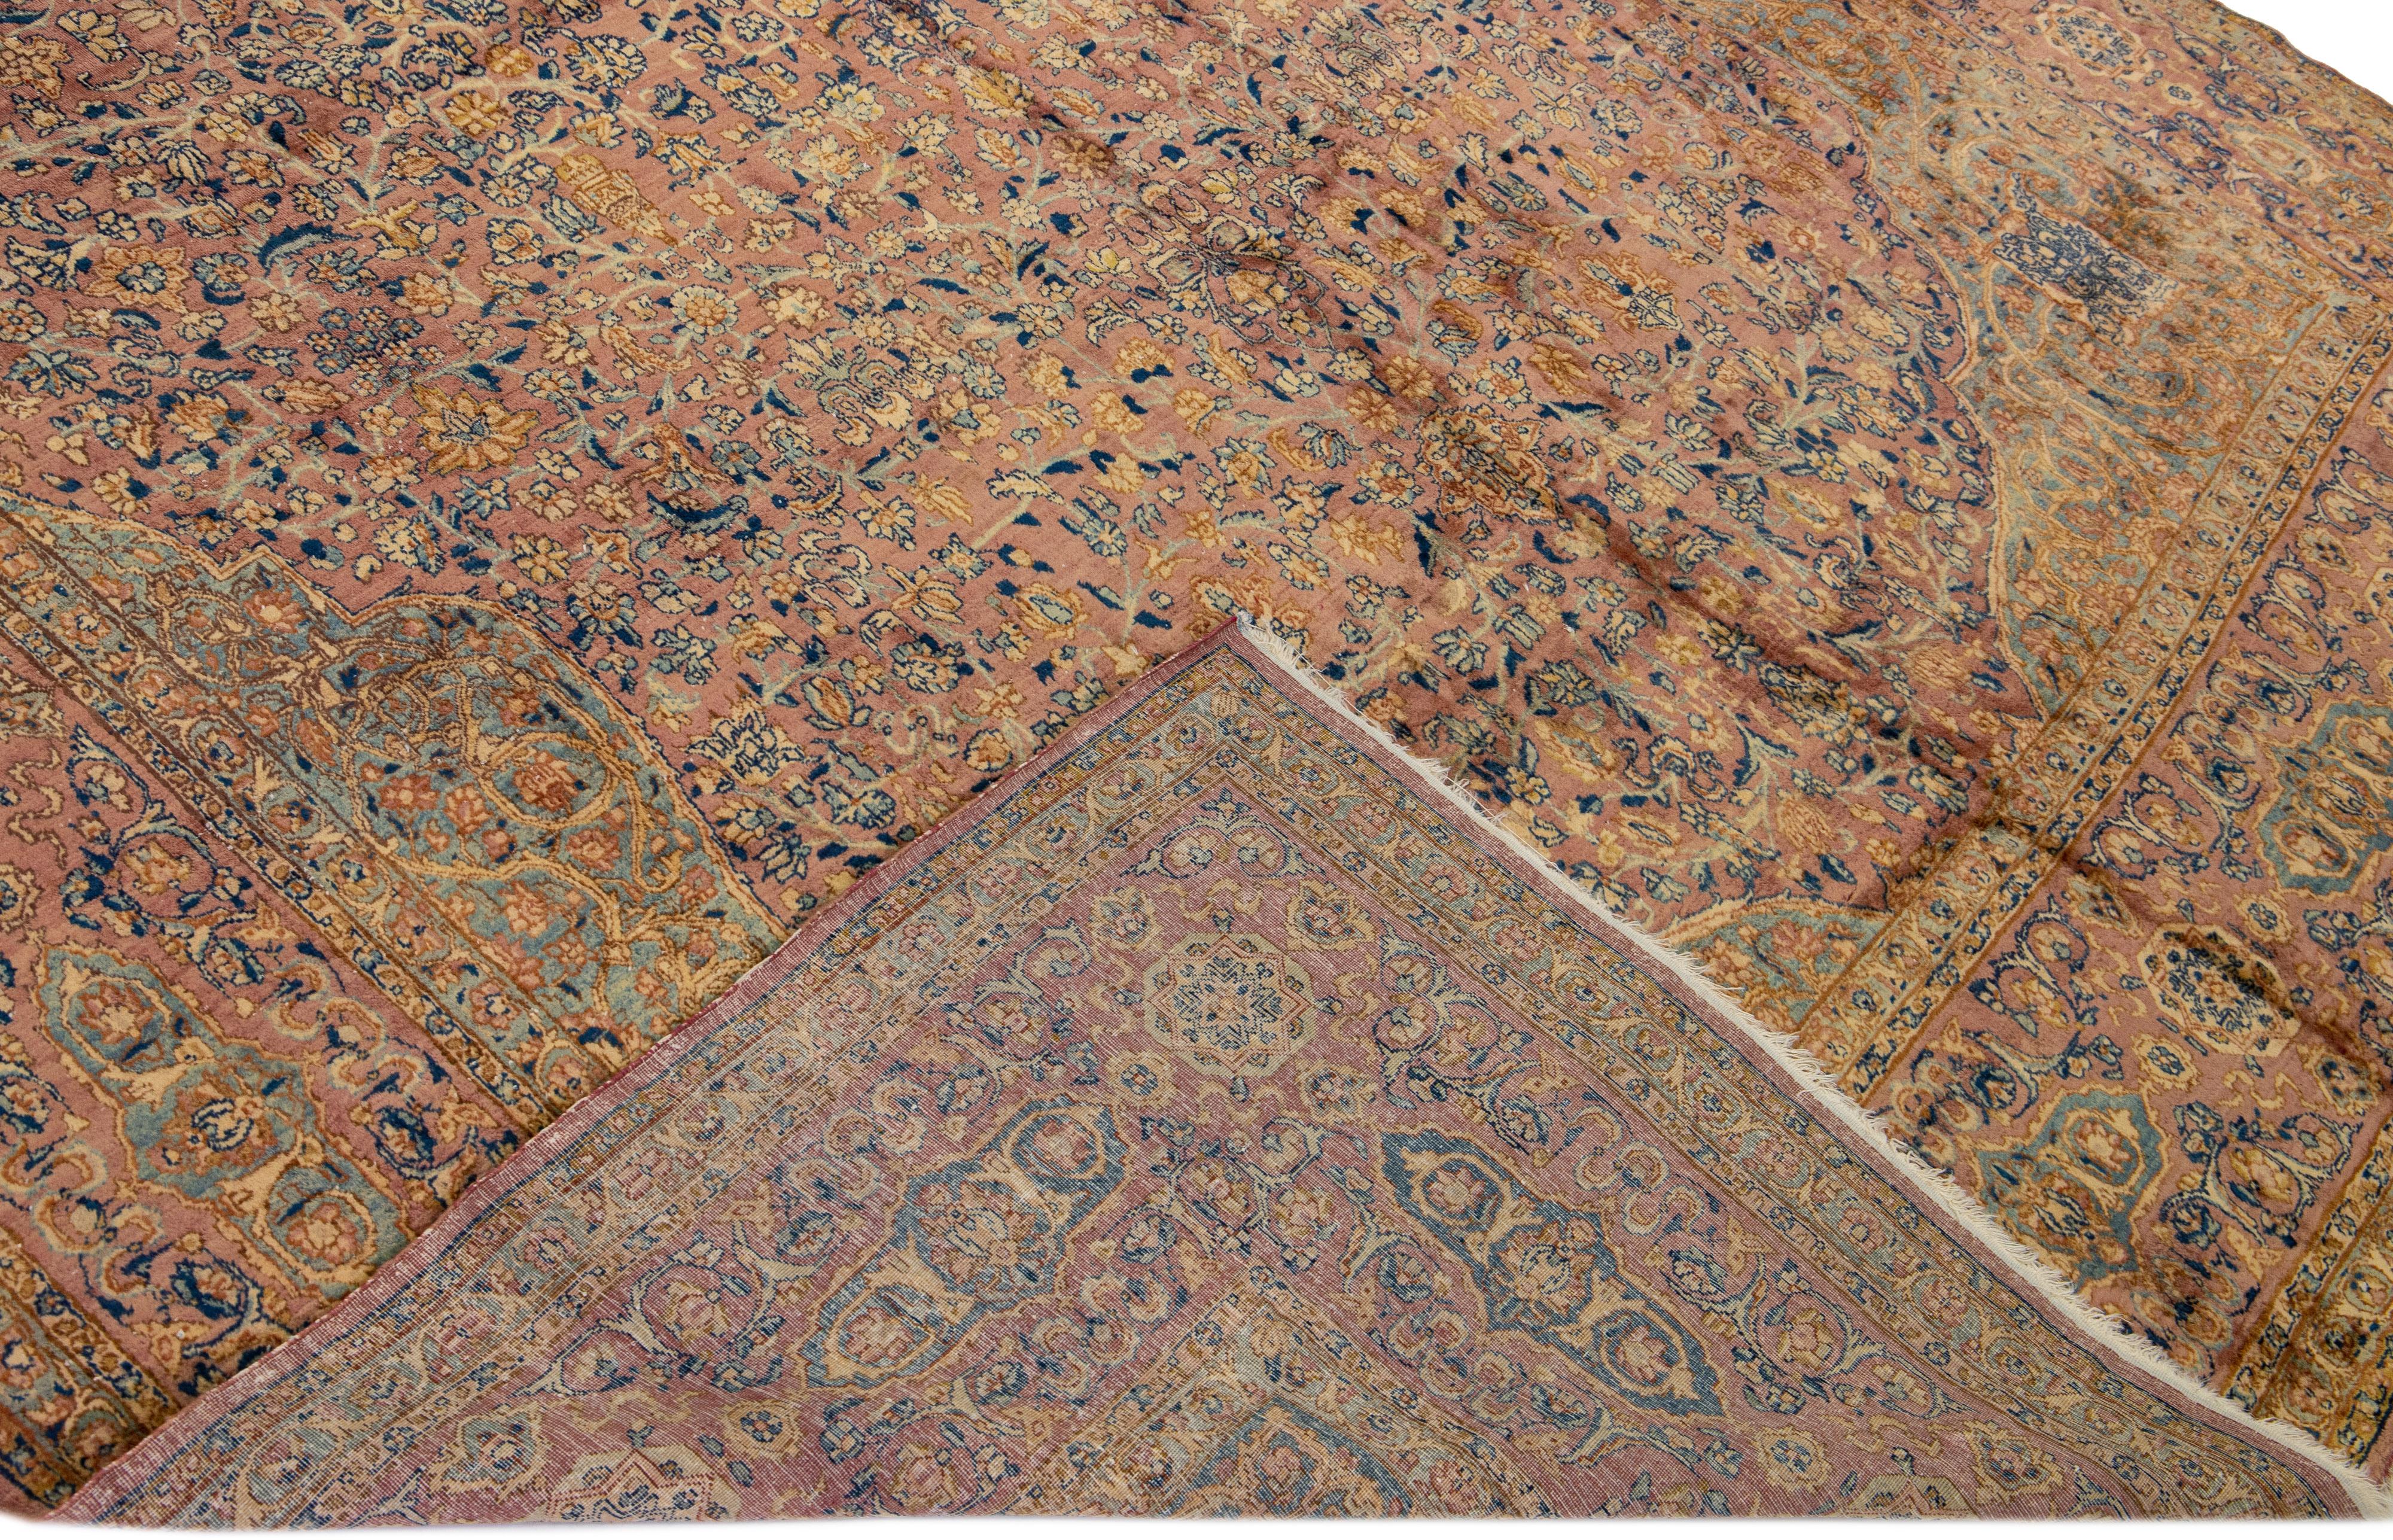 Beautiful antique Kerman hand-knotted wool rug with a red-rust field. This Kerman rug has multicolor accents in a gorgeous all-over medallion floral pattern design.

This rug measures: 8'1